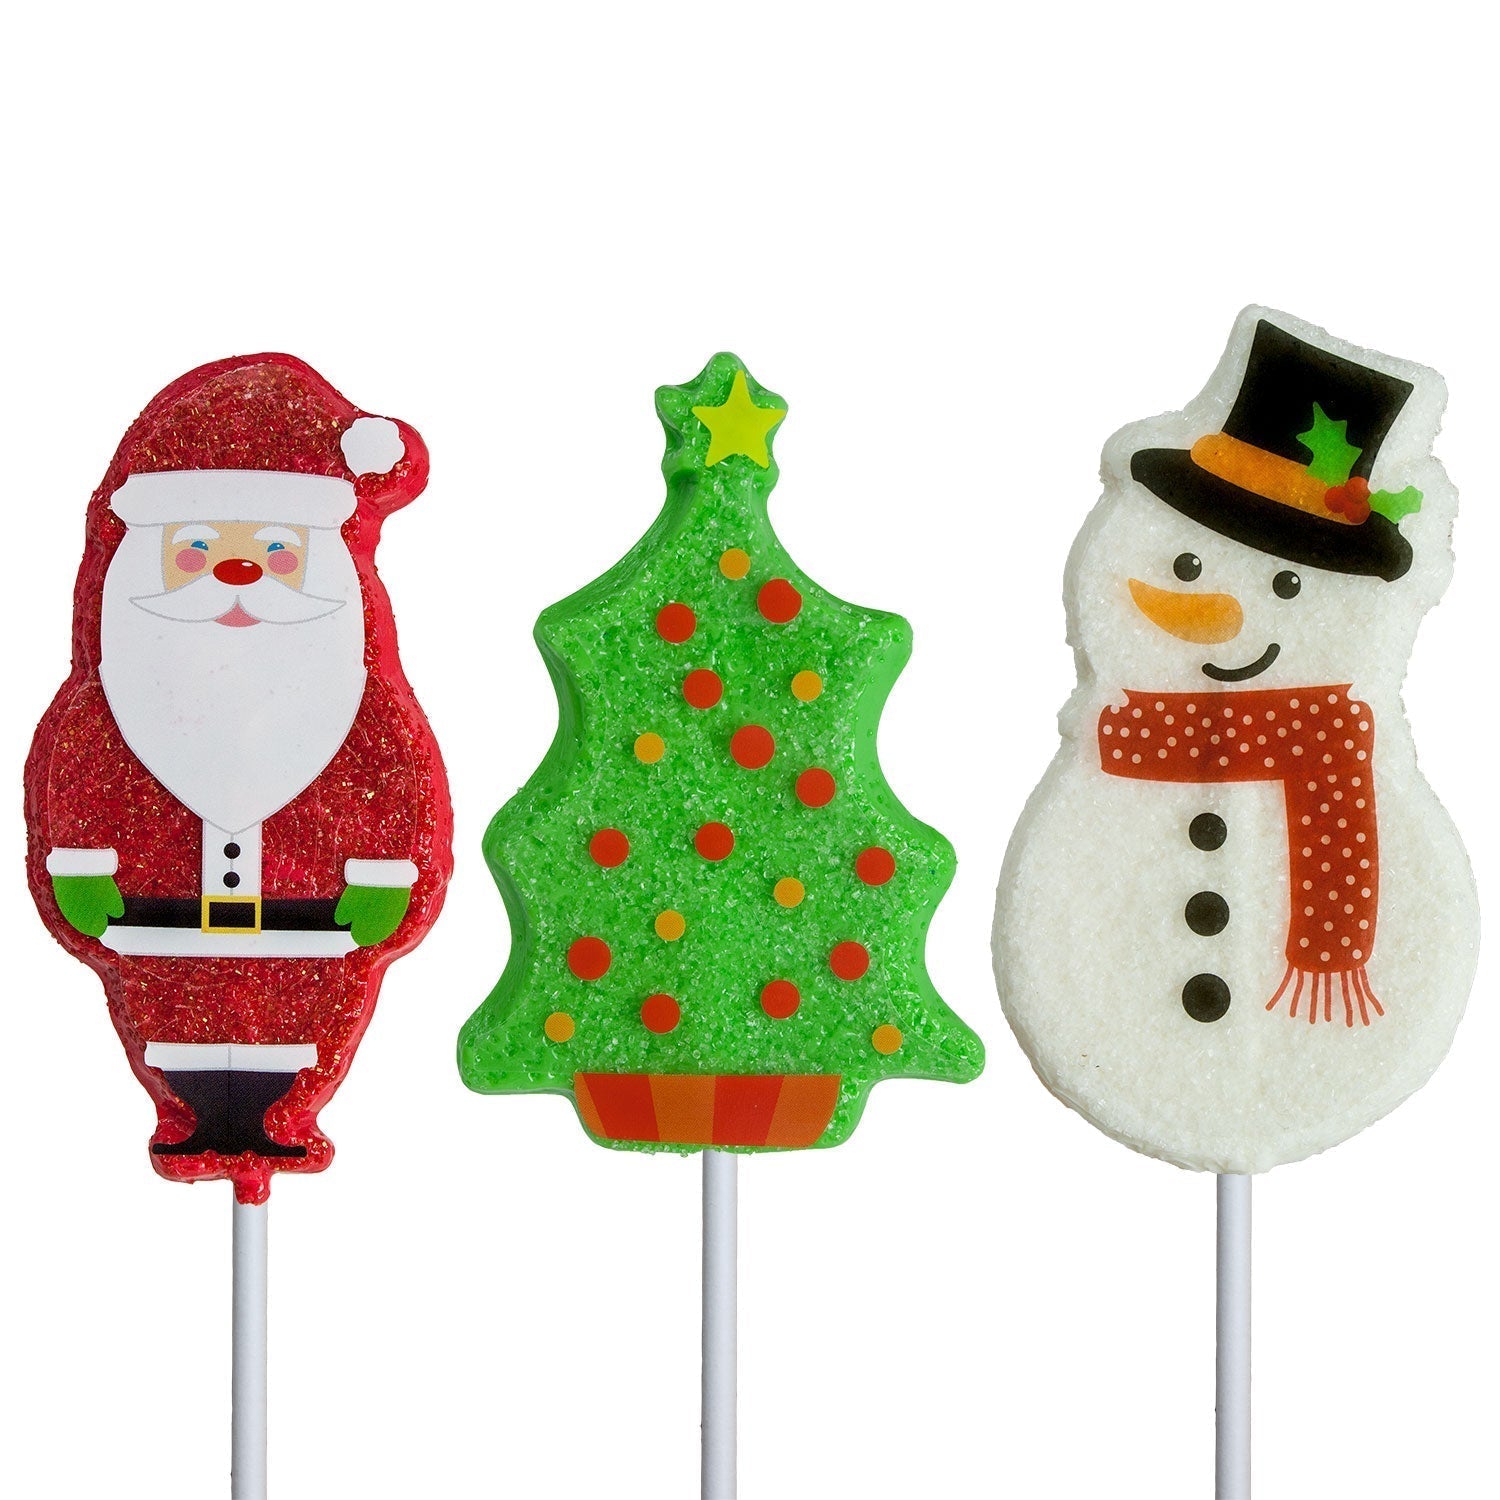 Body Part Lollipops - Assorted by Melville Candy Company